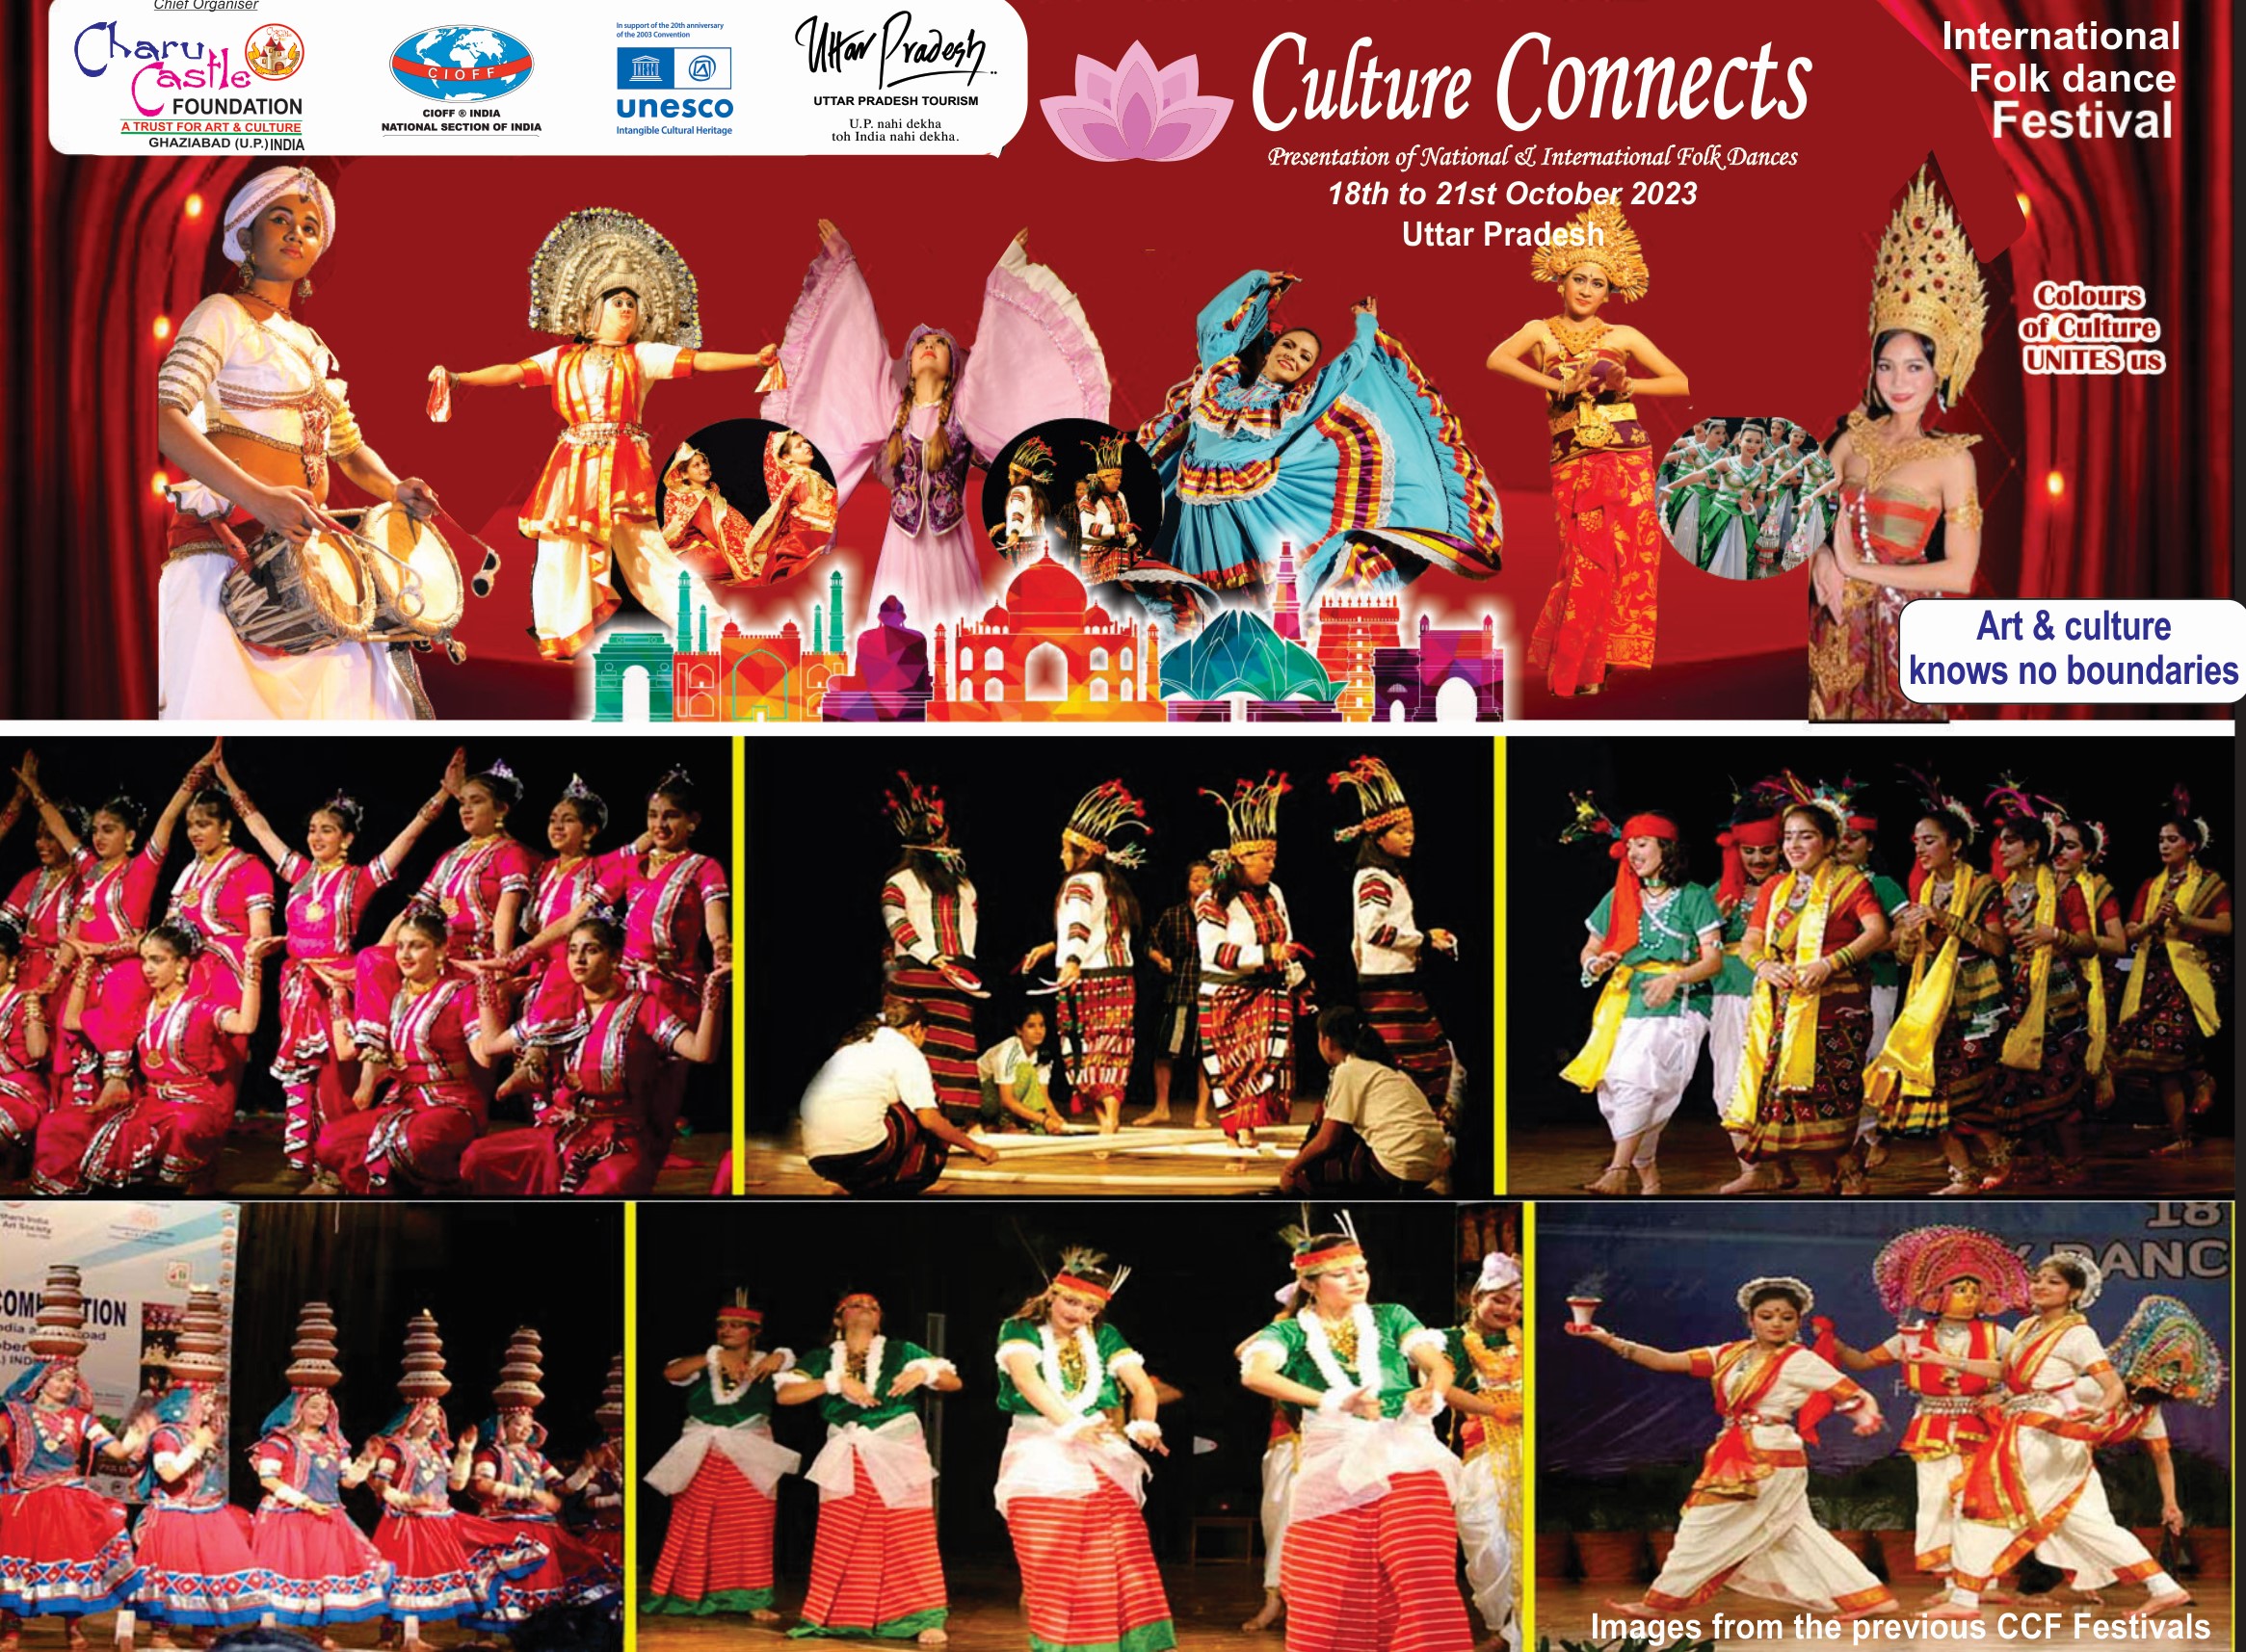 International Folk Dance Festival “ Culture Connects” 18th to 21st